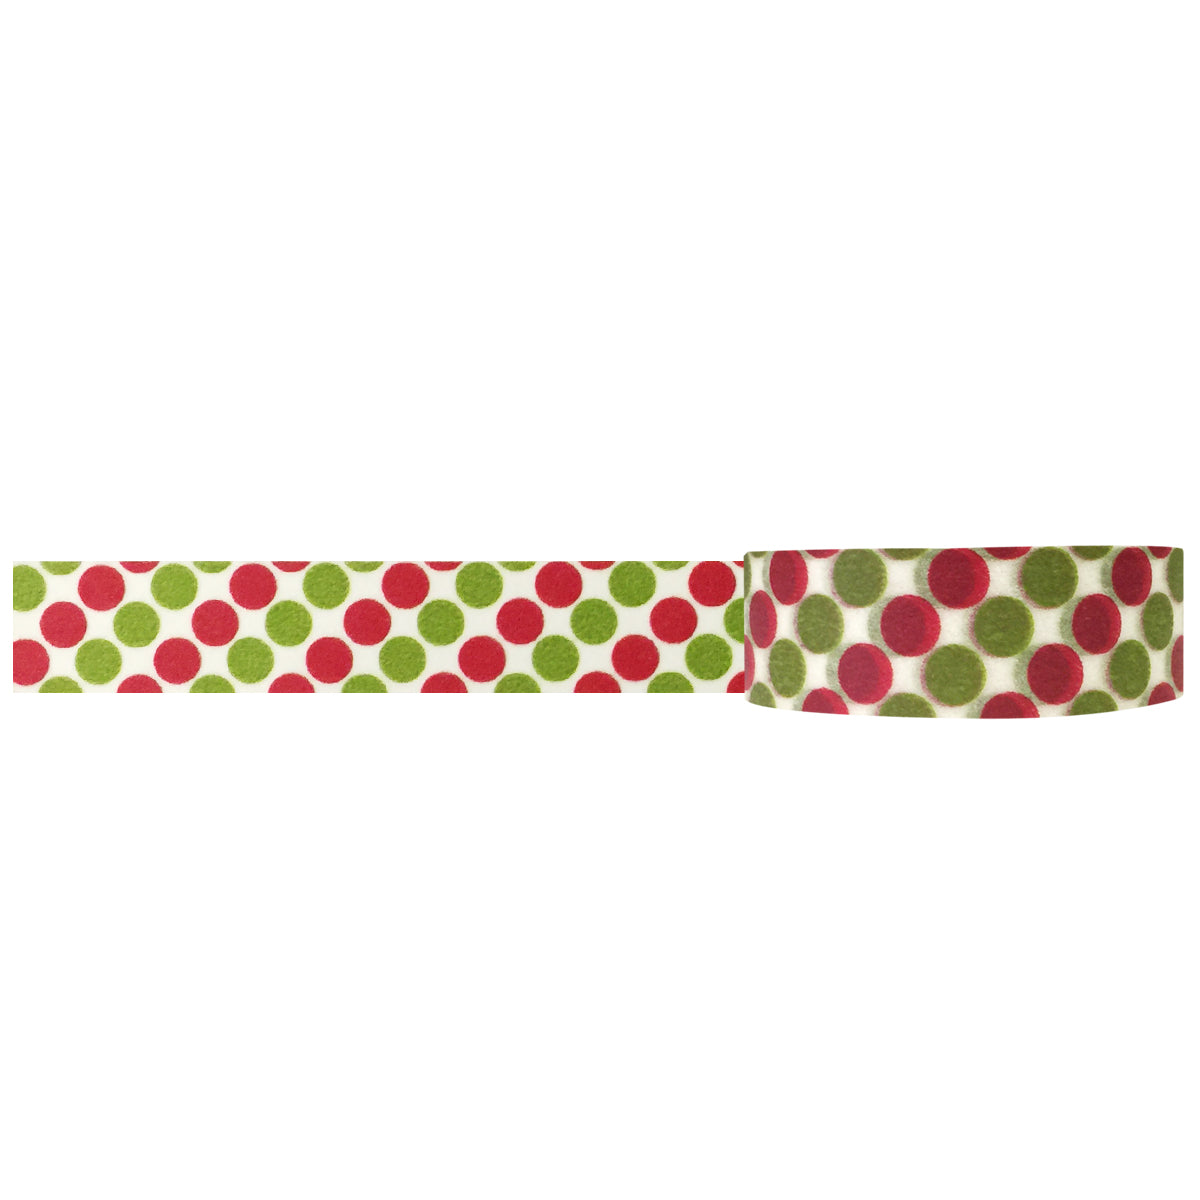 Wrapables Dotted Washi Masking Tape, Glo-Dots